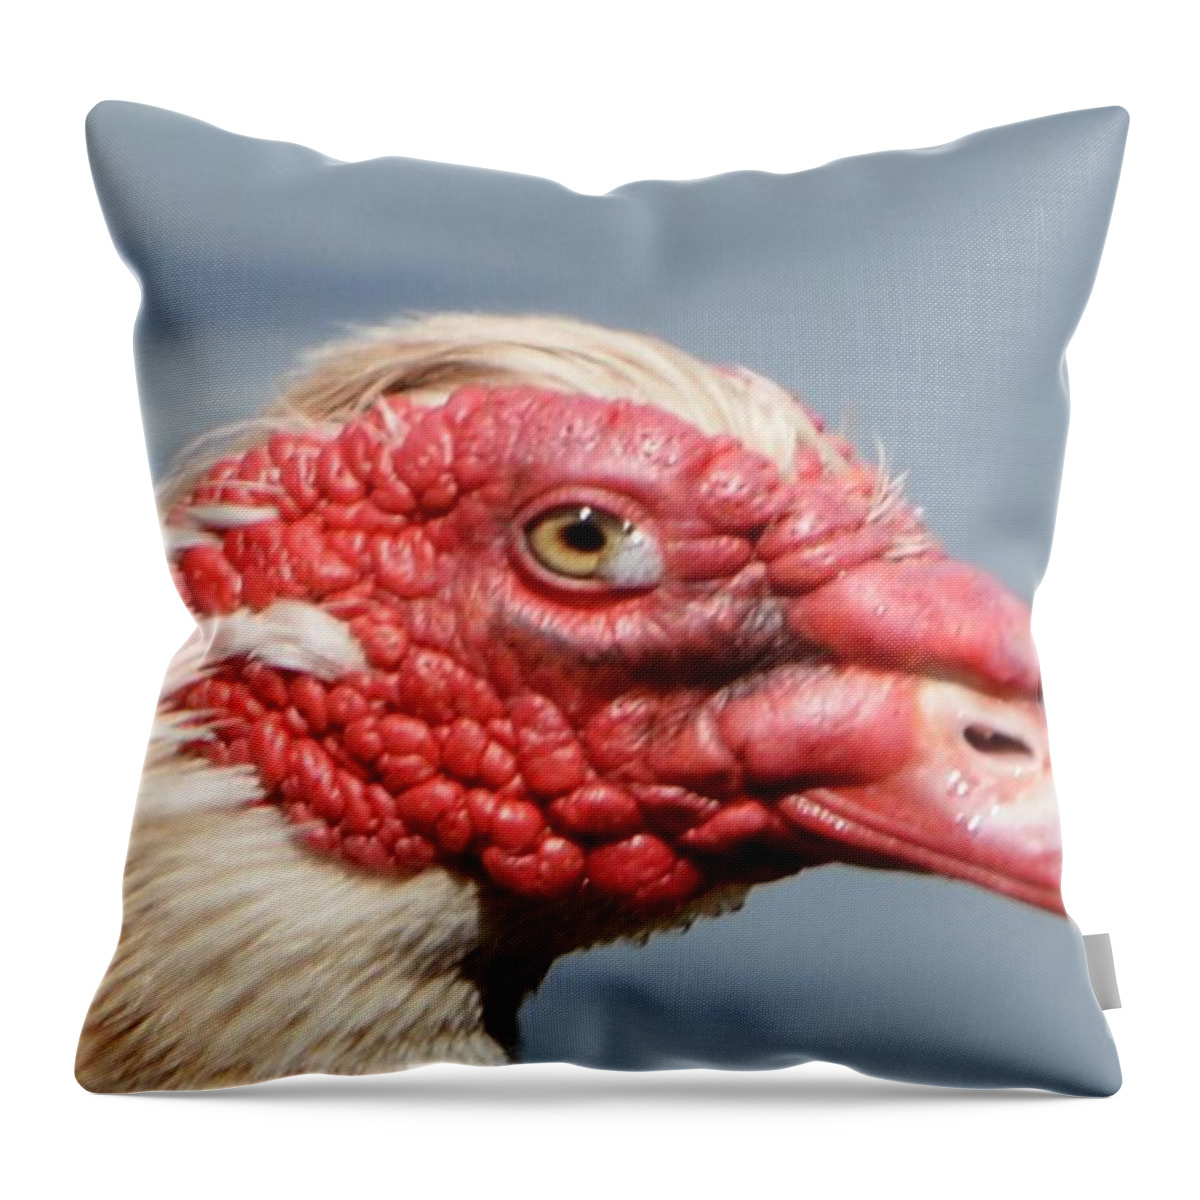 Geese Throw Pillow featuring the photograph Crying Goose by Dani McEvoy